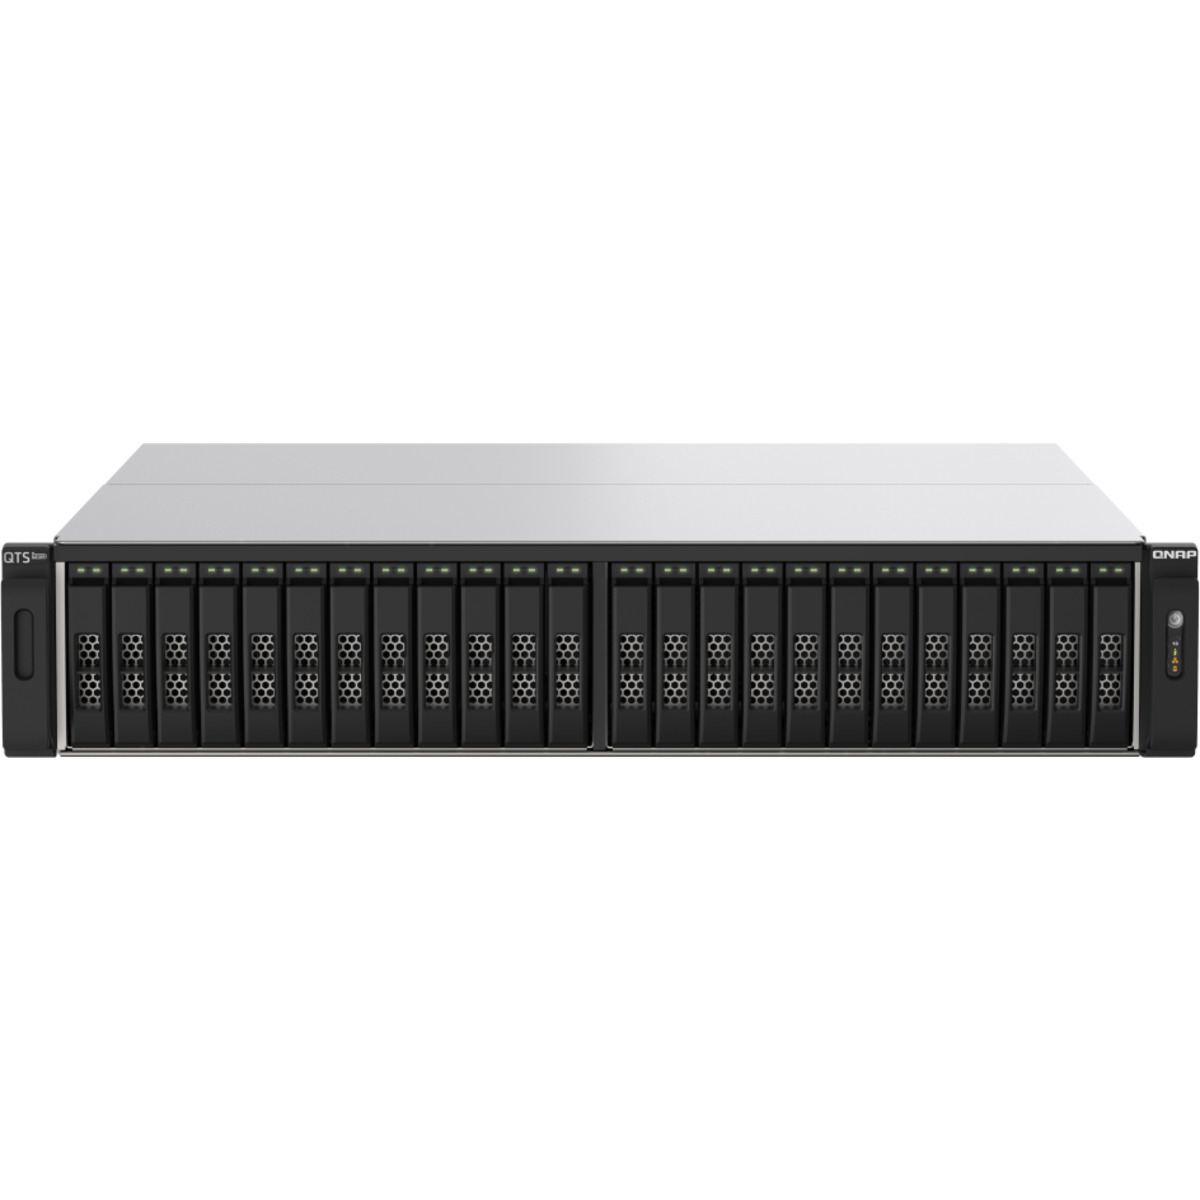 QNAP TS-h2490FU-7232P 92tb 24-Bay RackMount Large Business / Enterprise NAS - Network Attached Storage Device 23x4tb Western Digital Red SN700 WDS400T1R0C  3400/3100MB/s M.2 2280 NVMe SSD NAS Class Drives Installed - Burn-In Tested TS-h2490FU-7232P